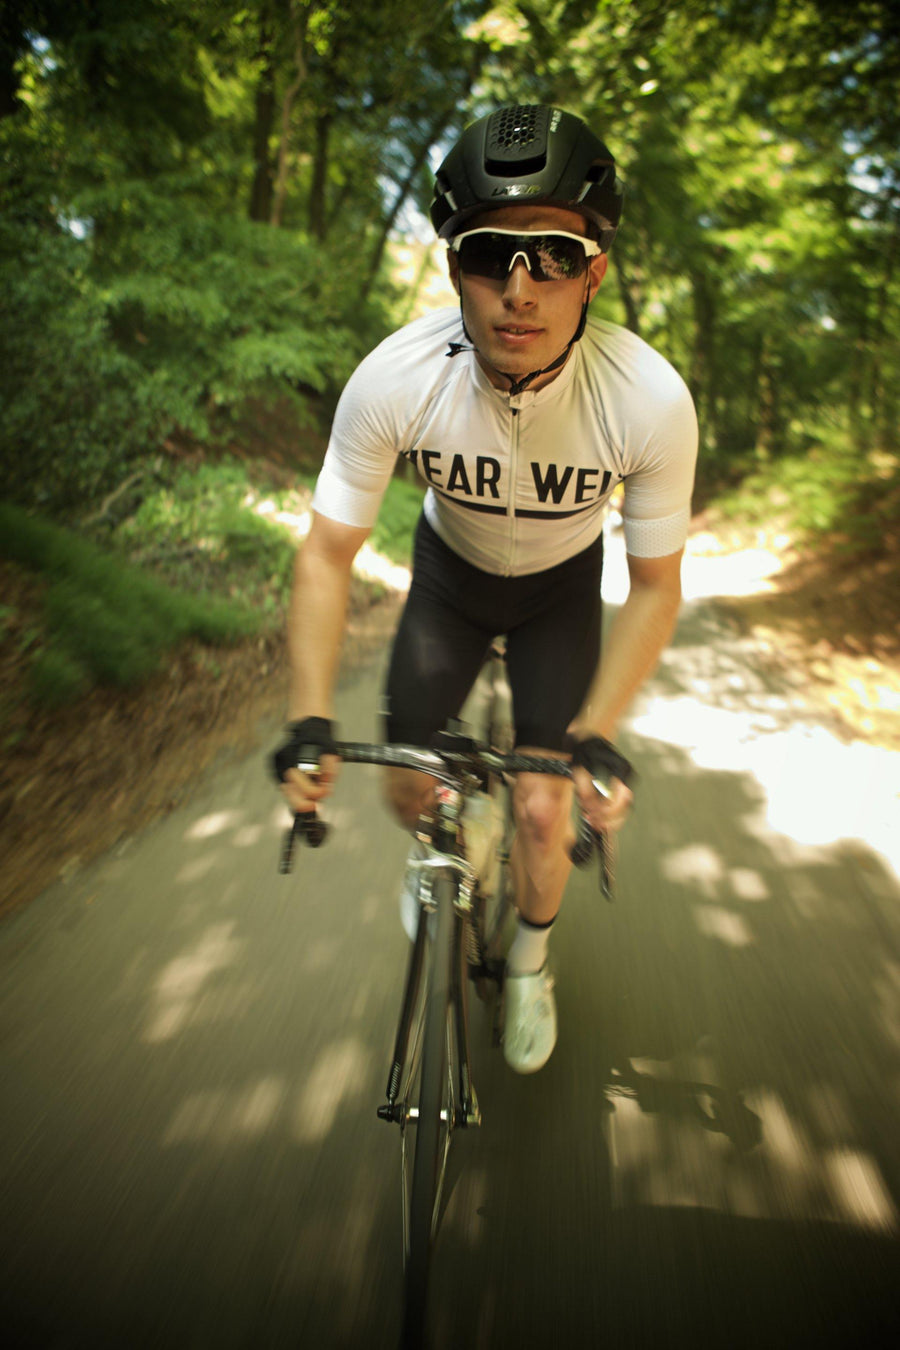 Revival Jersey - Second Edition | White - Short Sleeve Jersey - Wearwell Cycle Company